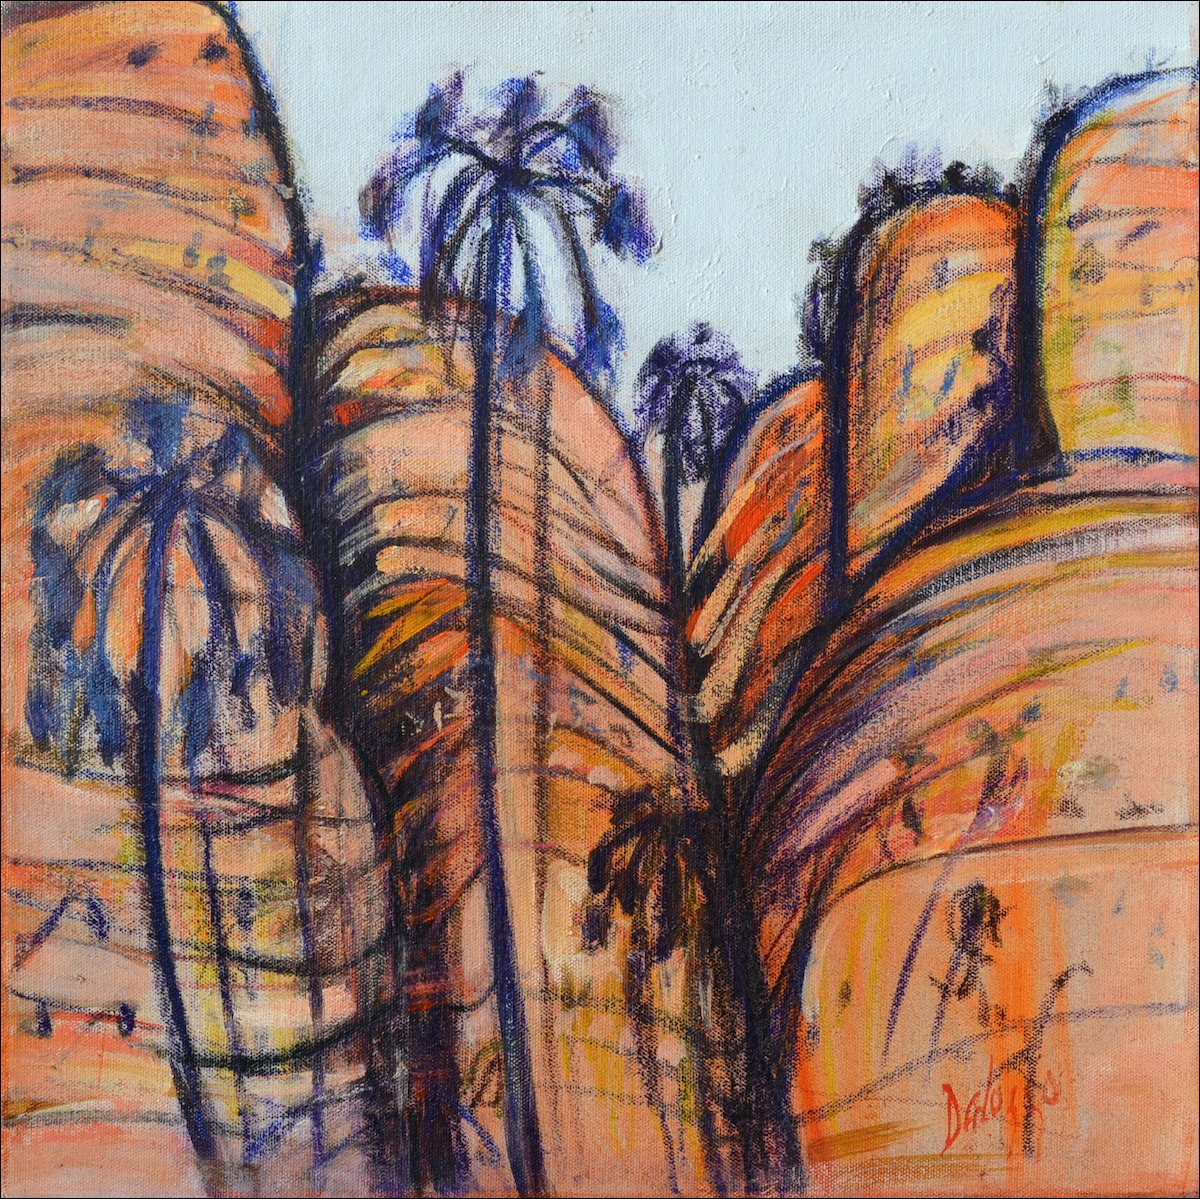 Landscape "In The Heart of The Bungles" Triptych Middle Panel Original Artwork by Lucette Dalozzo